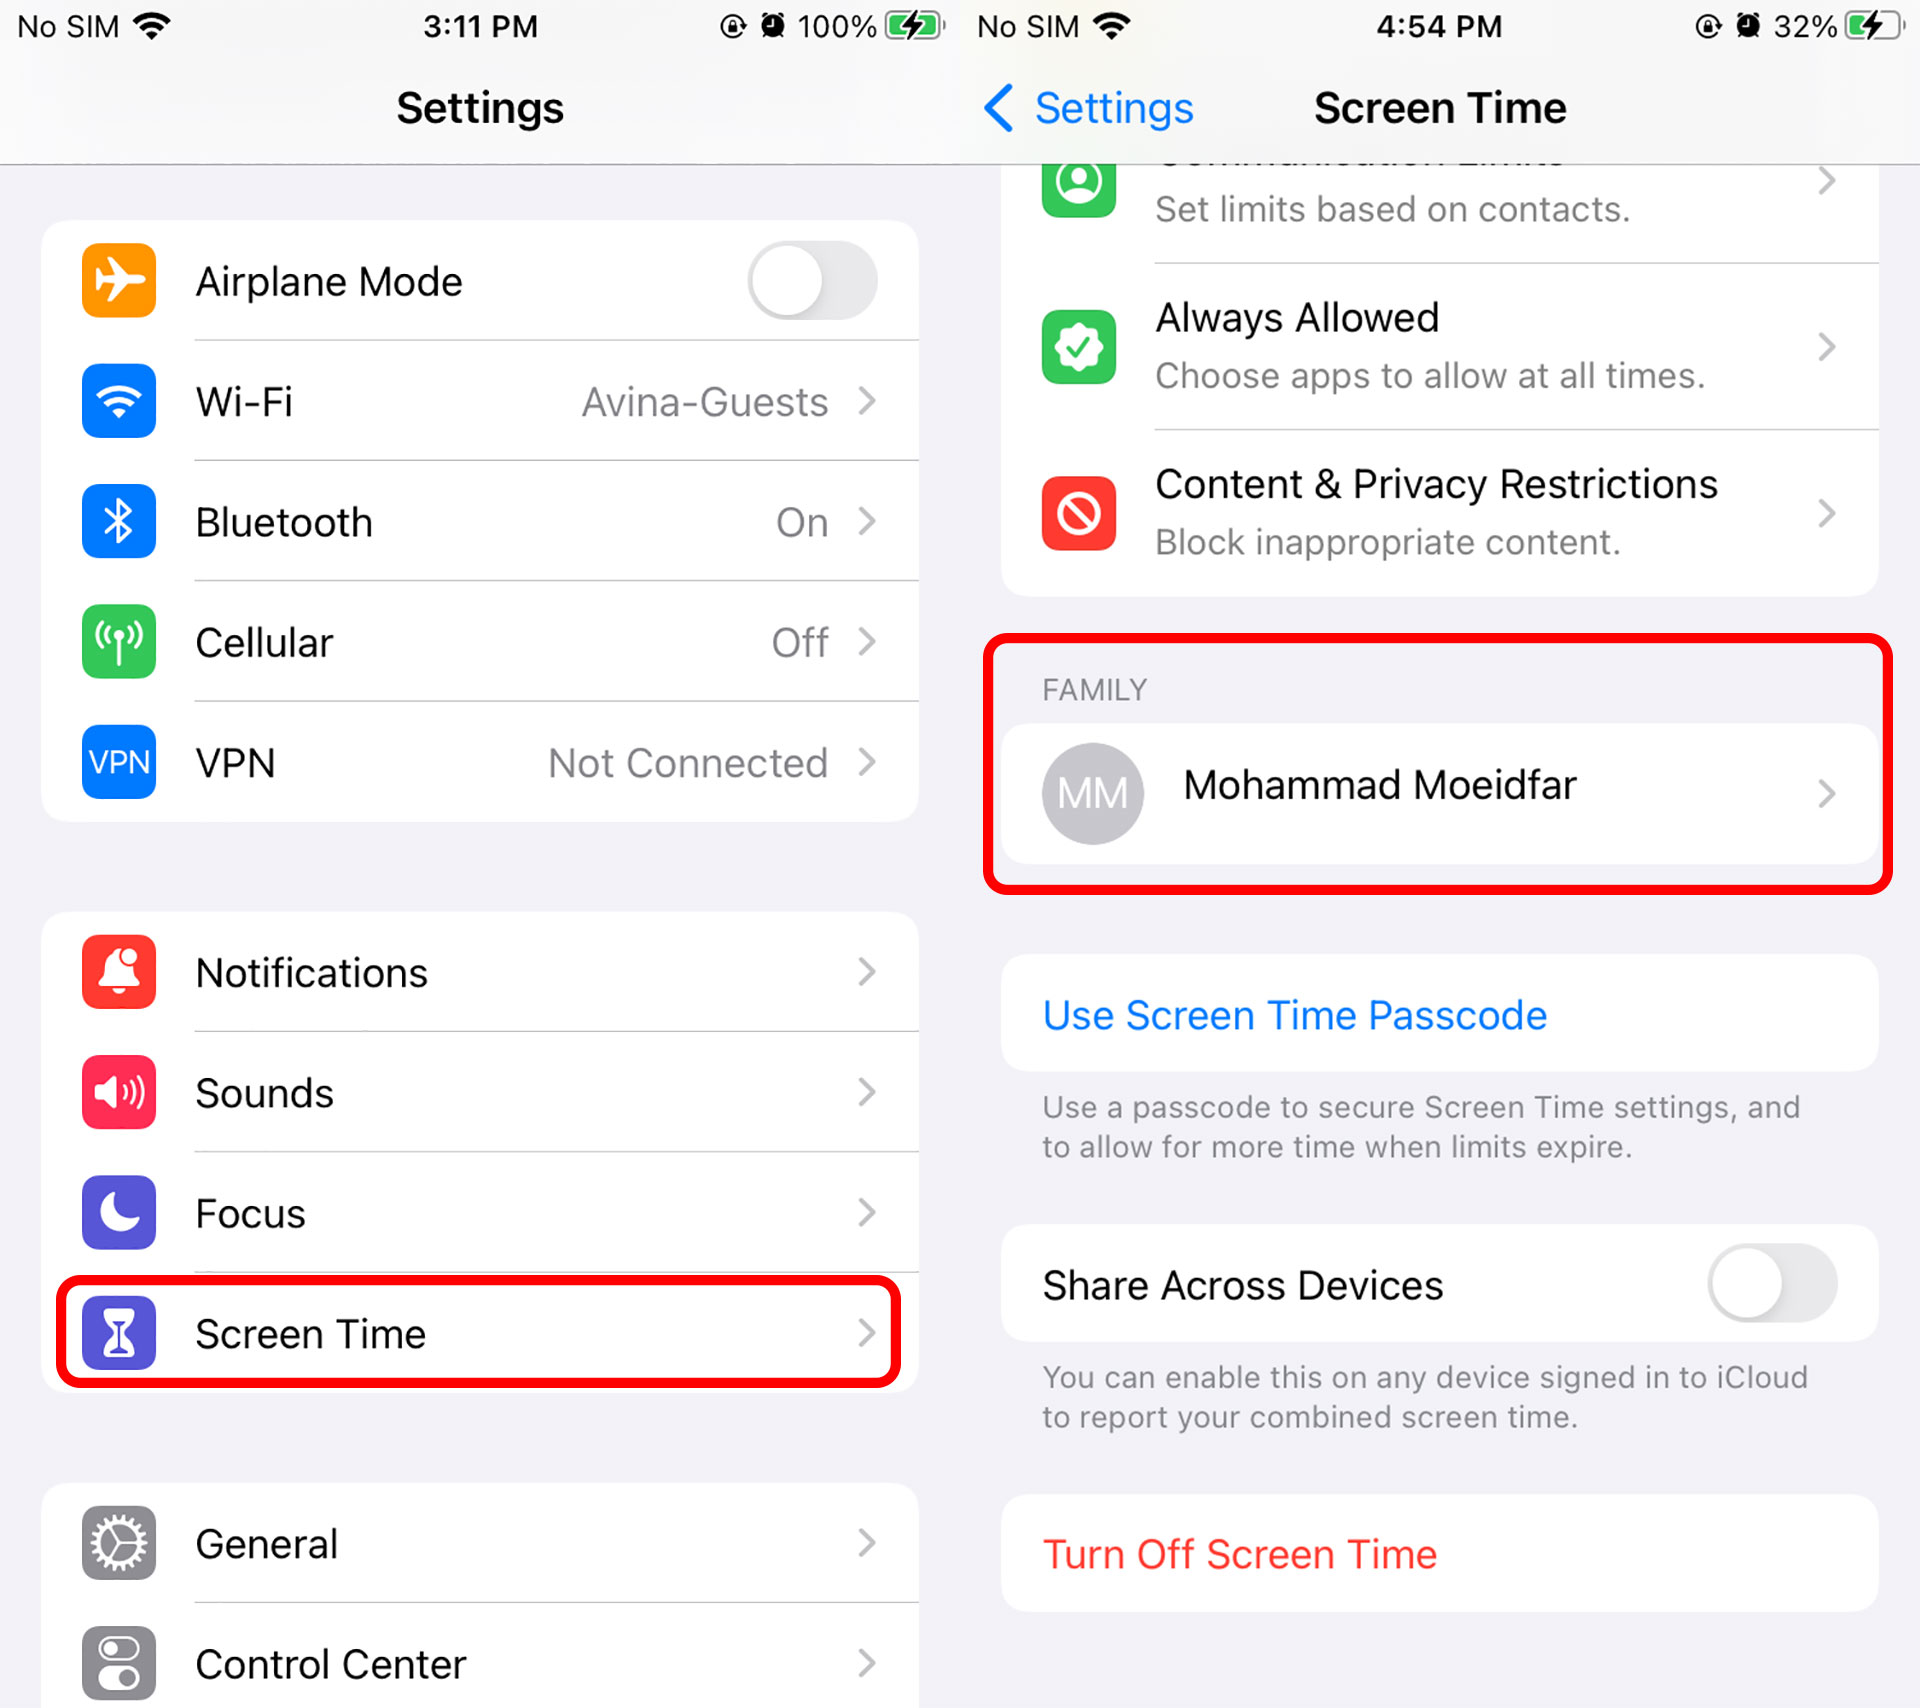 Access to Screen Time on iPhone